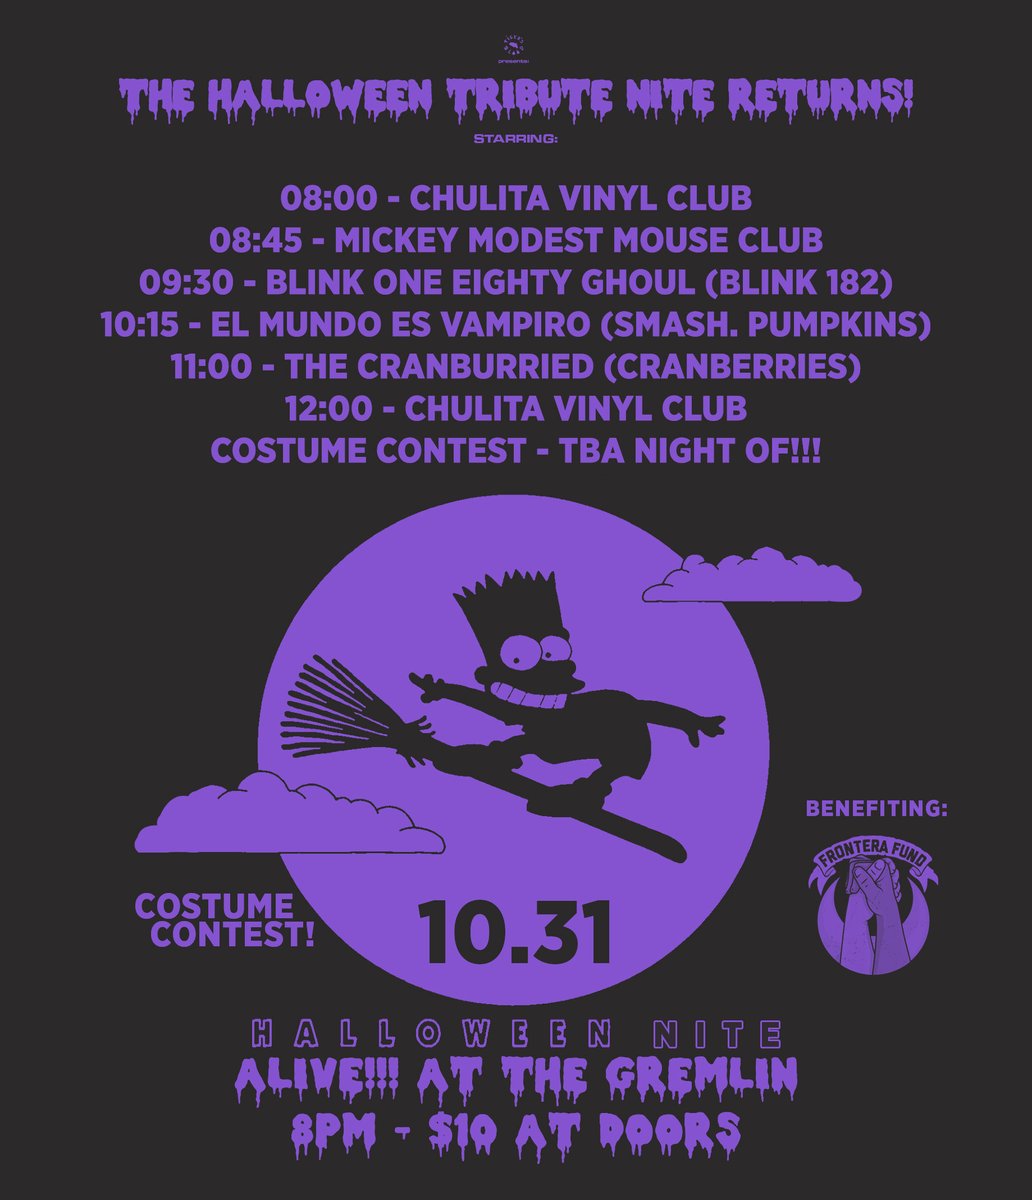 The Halloween Tribute Nite returns - 10.31! Some of the very best in our regional scene coming thru to deliver freaky tribute sets to the Cranberries, Smashing Pumpkins, /&more.

Net proceeds going to @FronteraFundRGV 
Doors at 8pm. Costume contest is happening.

$10 at doors!